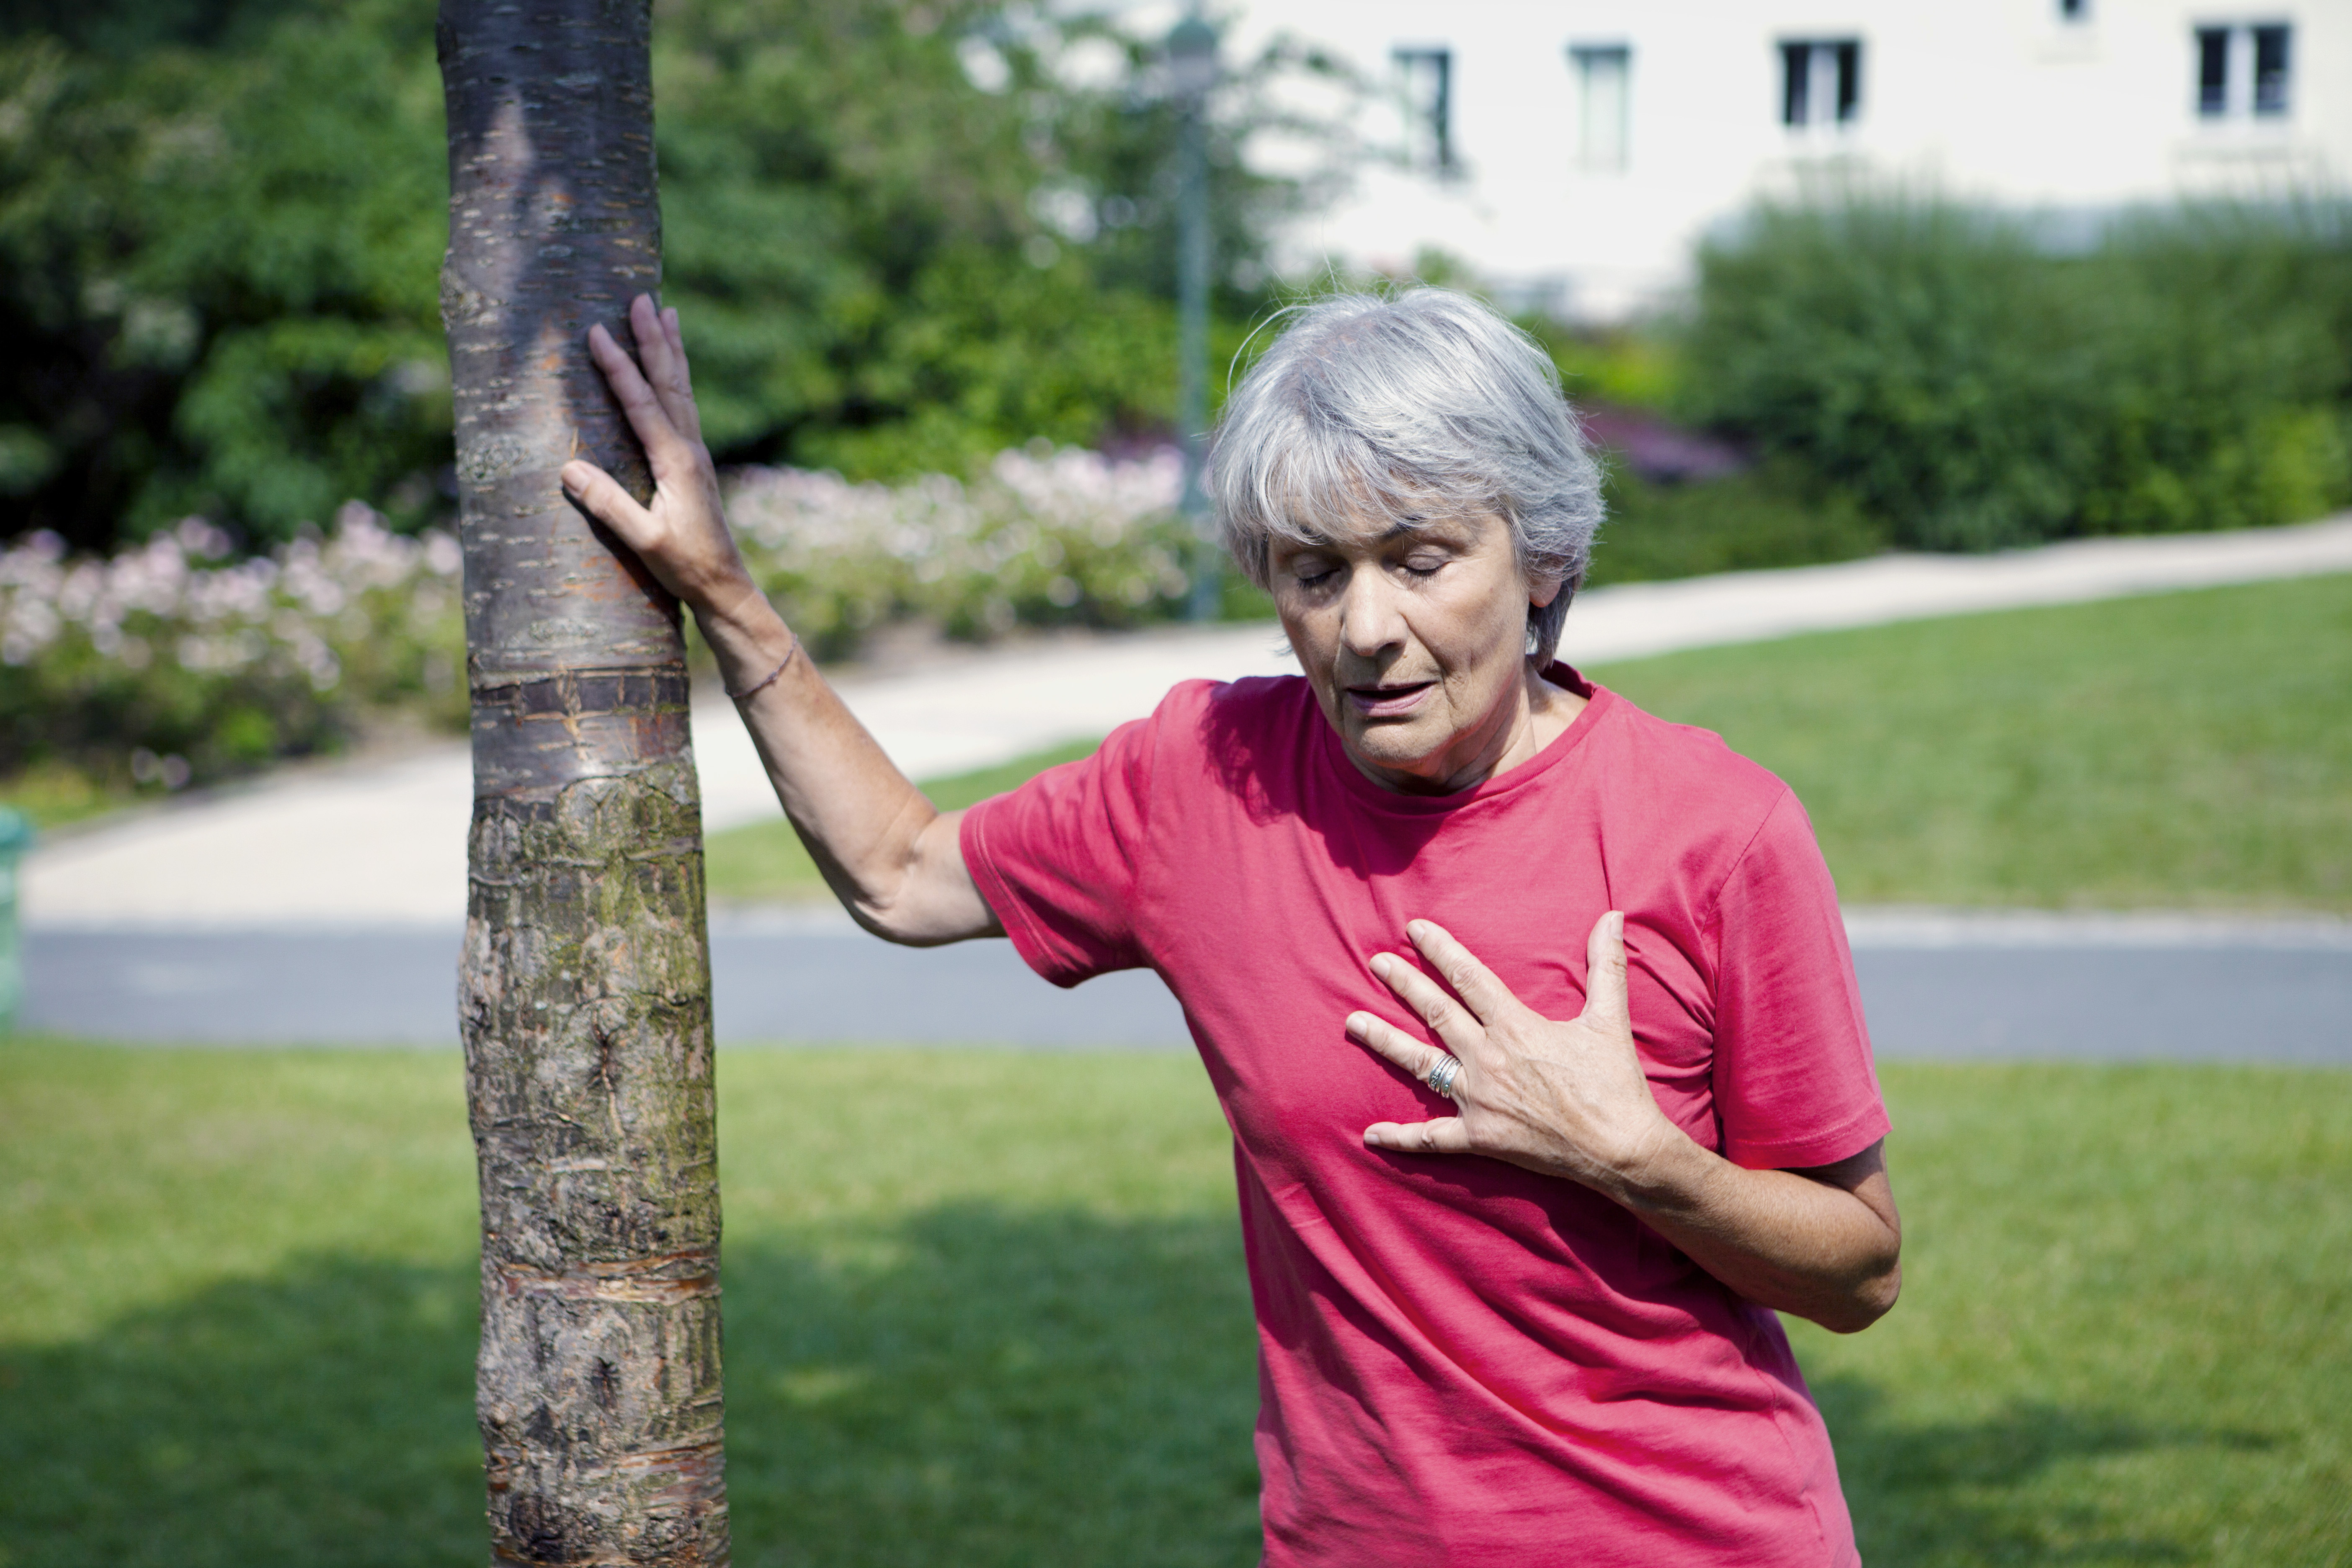 European Review of Exercise and COPD Highlights Importance of Physical Activity